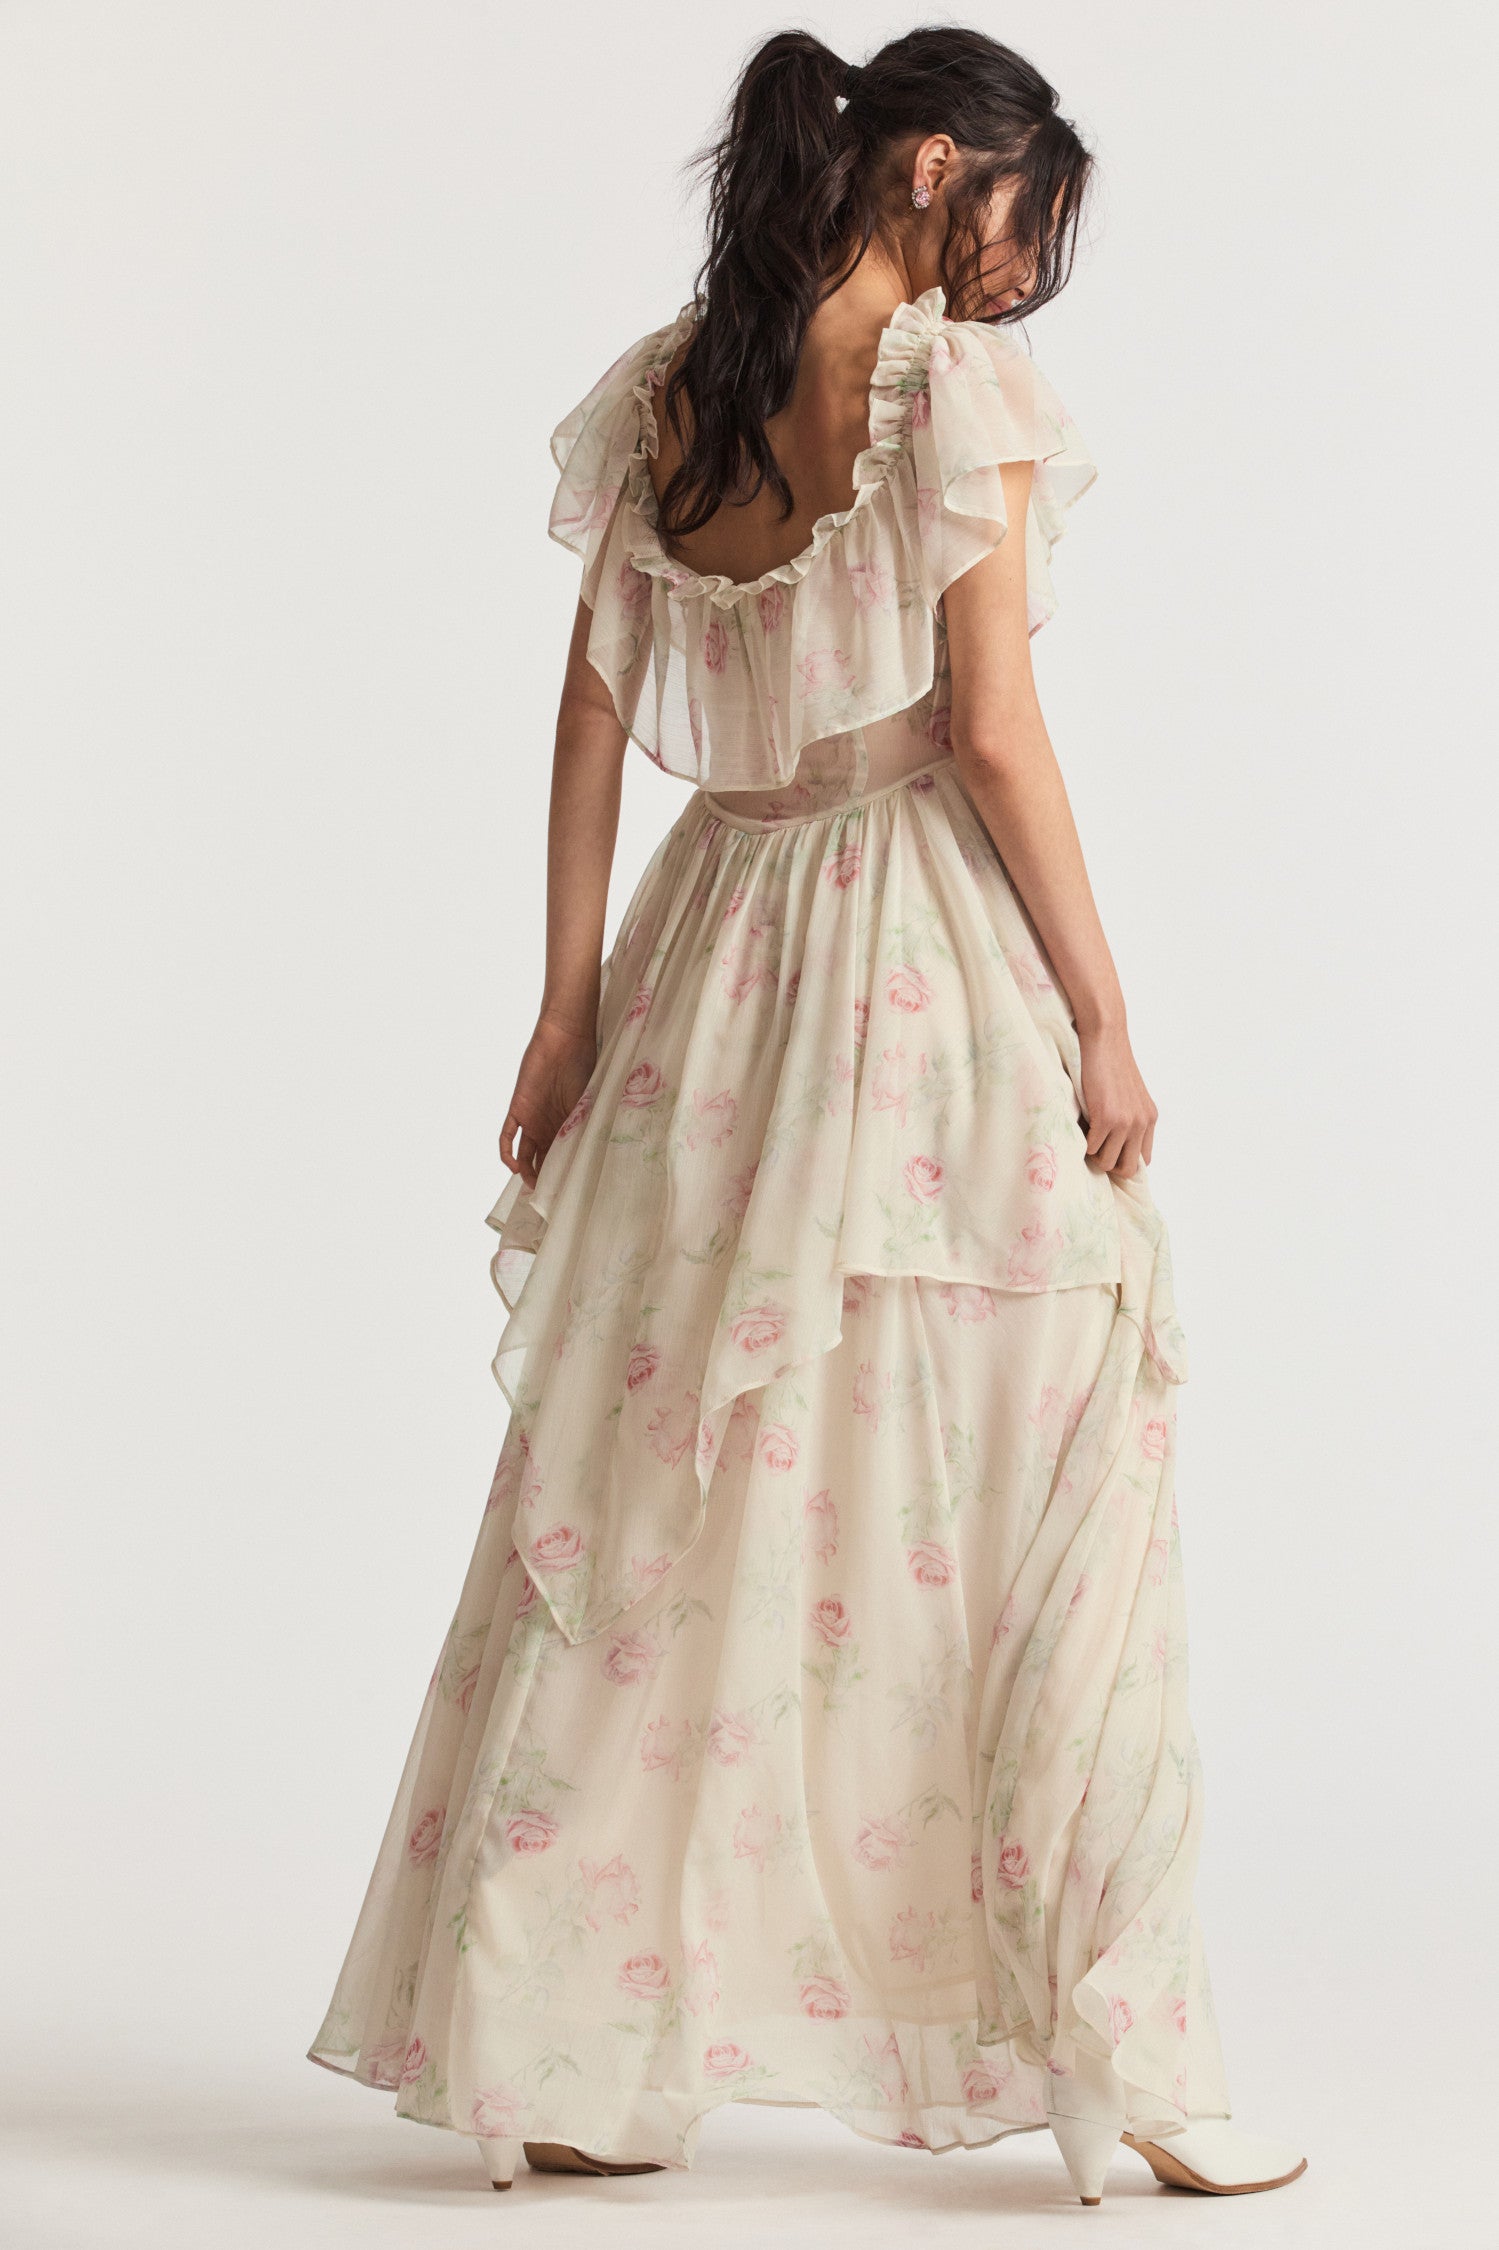 Cream maxi dress with elastic off-the-shoulder silhouette, ruffles around the neck, and a shaped skirt with ethereal tiers.